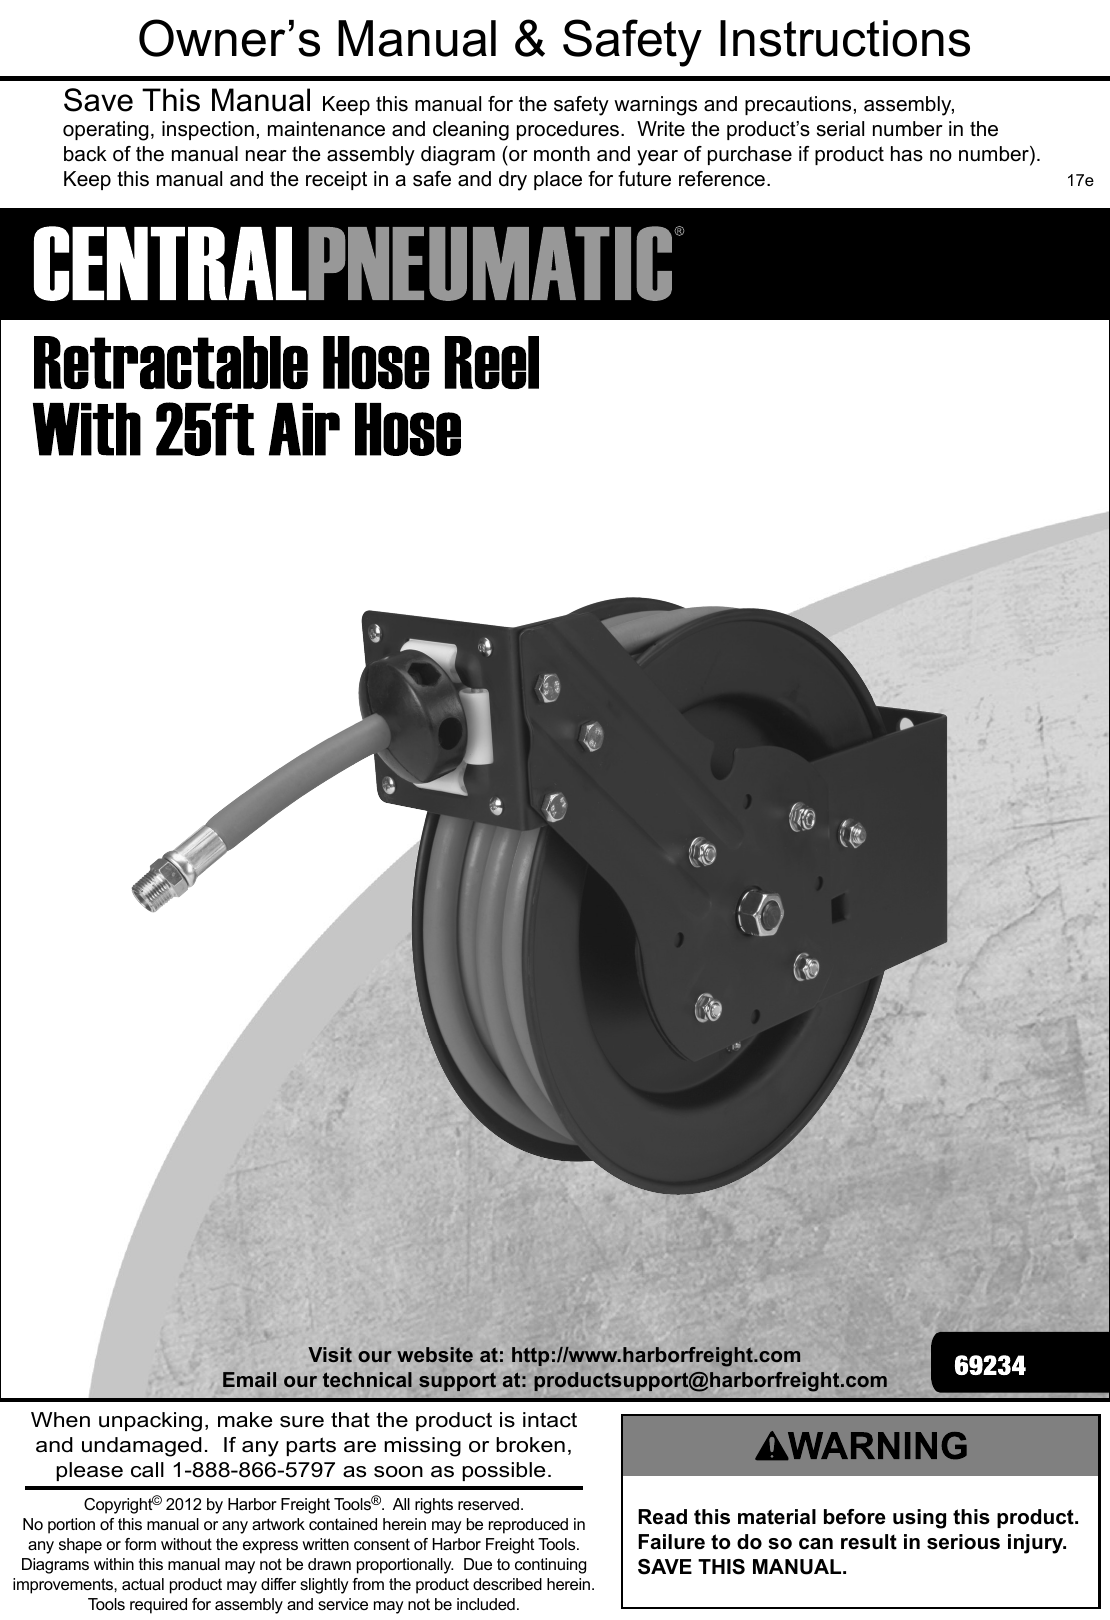 Manual For The 69234 25 Ft. Heavy Duty Retractable Air Hose Reel With 3/8